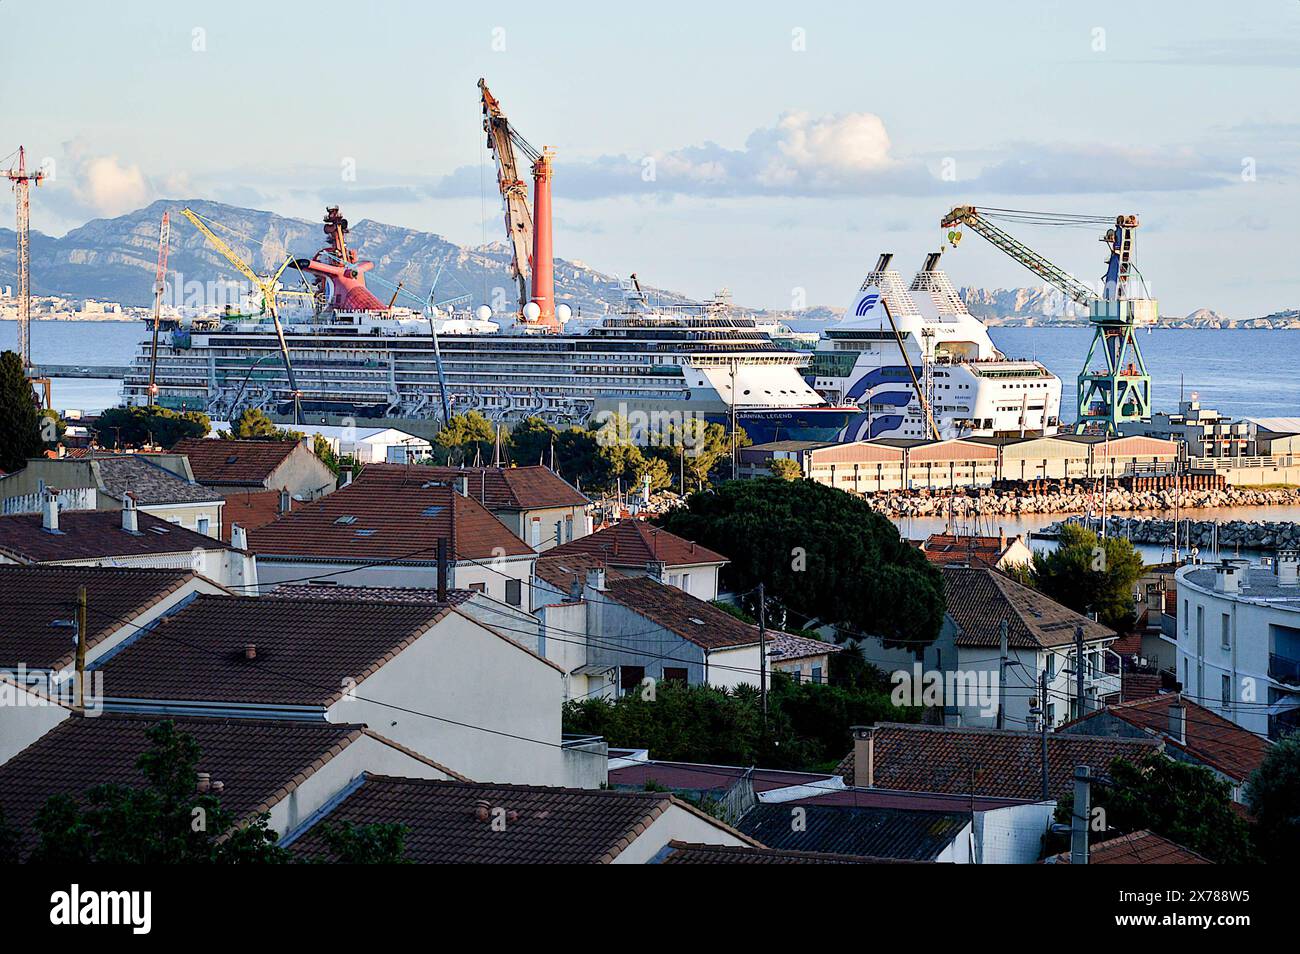 The cruise ship Carnival Legend, the Pipelay Crane Vessel (PCV) Saipem Constellation and the ocean liner Rhapsody are seen docked in 'Form 10' for maintenance and repairs. “Form 10” is the largest basin on the naval site of the Grand Port Maritime de Marseille (GPMM). It is the largest form of refit in the Mediterranean. Stock Photo